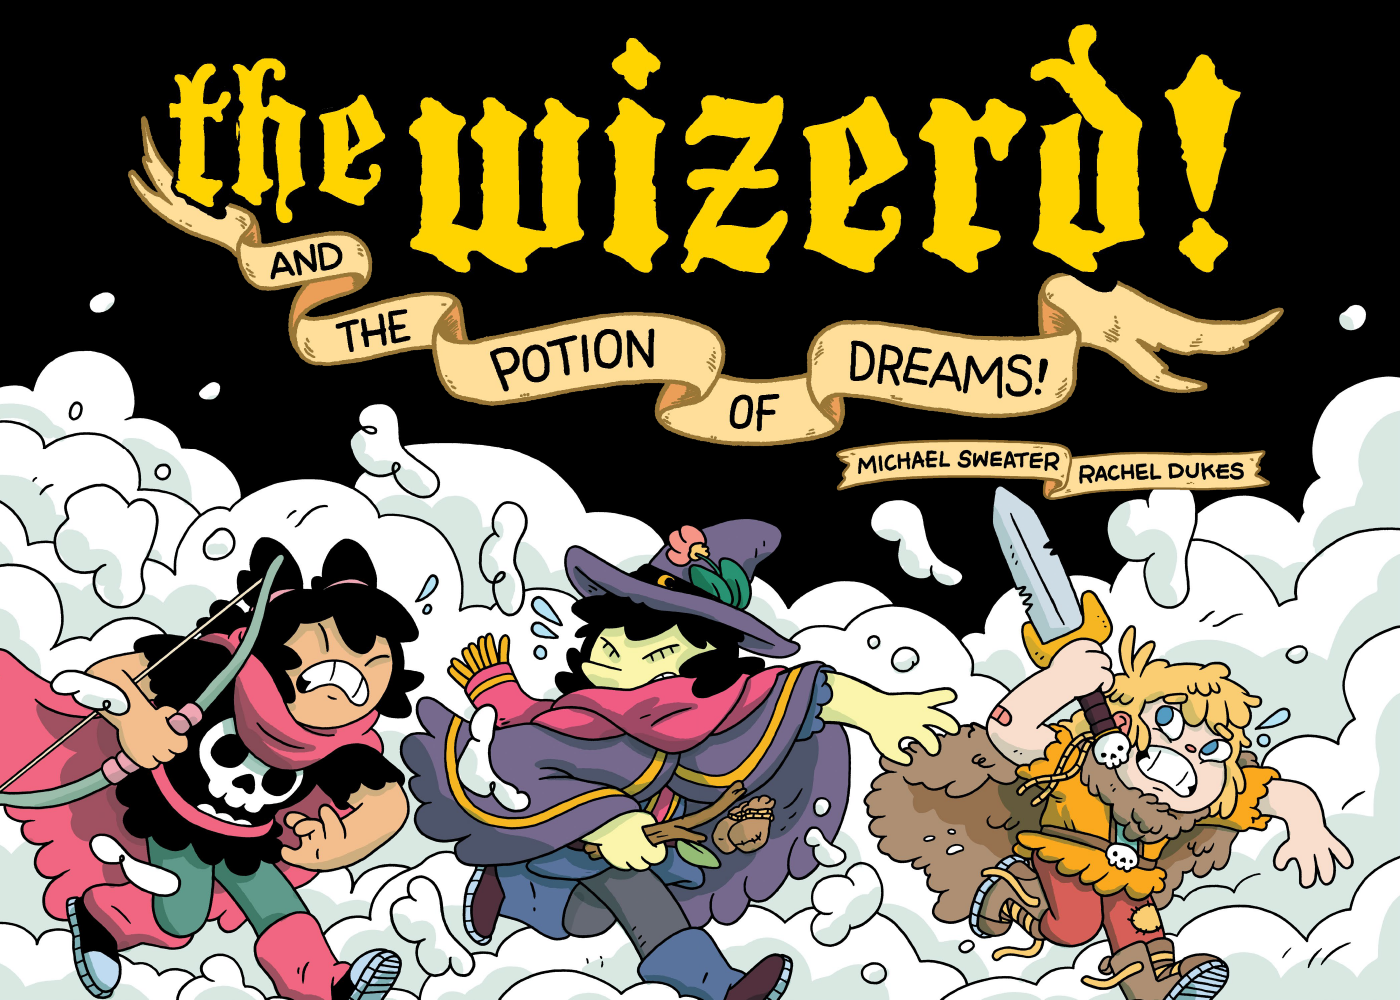 "The Wizerd! and the Potion of Dreams!" is written in fantastical font, with 3 characters (the Archer, the Wizerd, and Wallace).